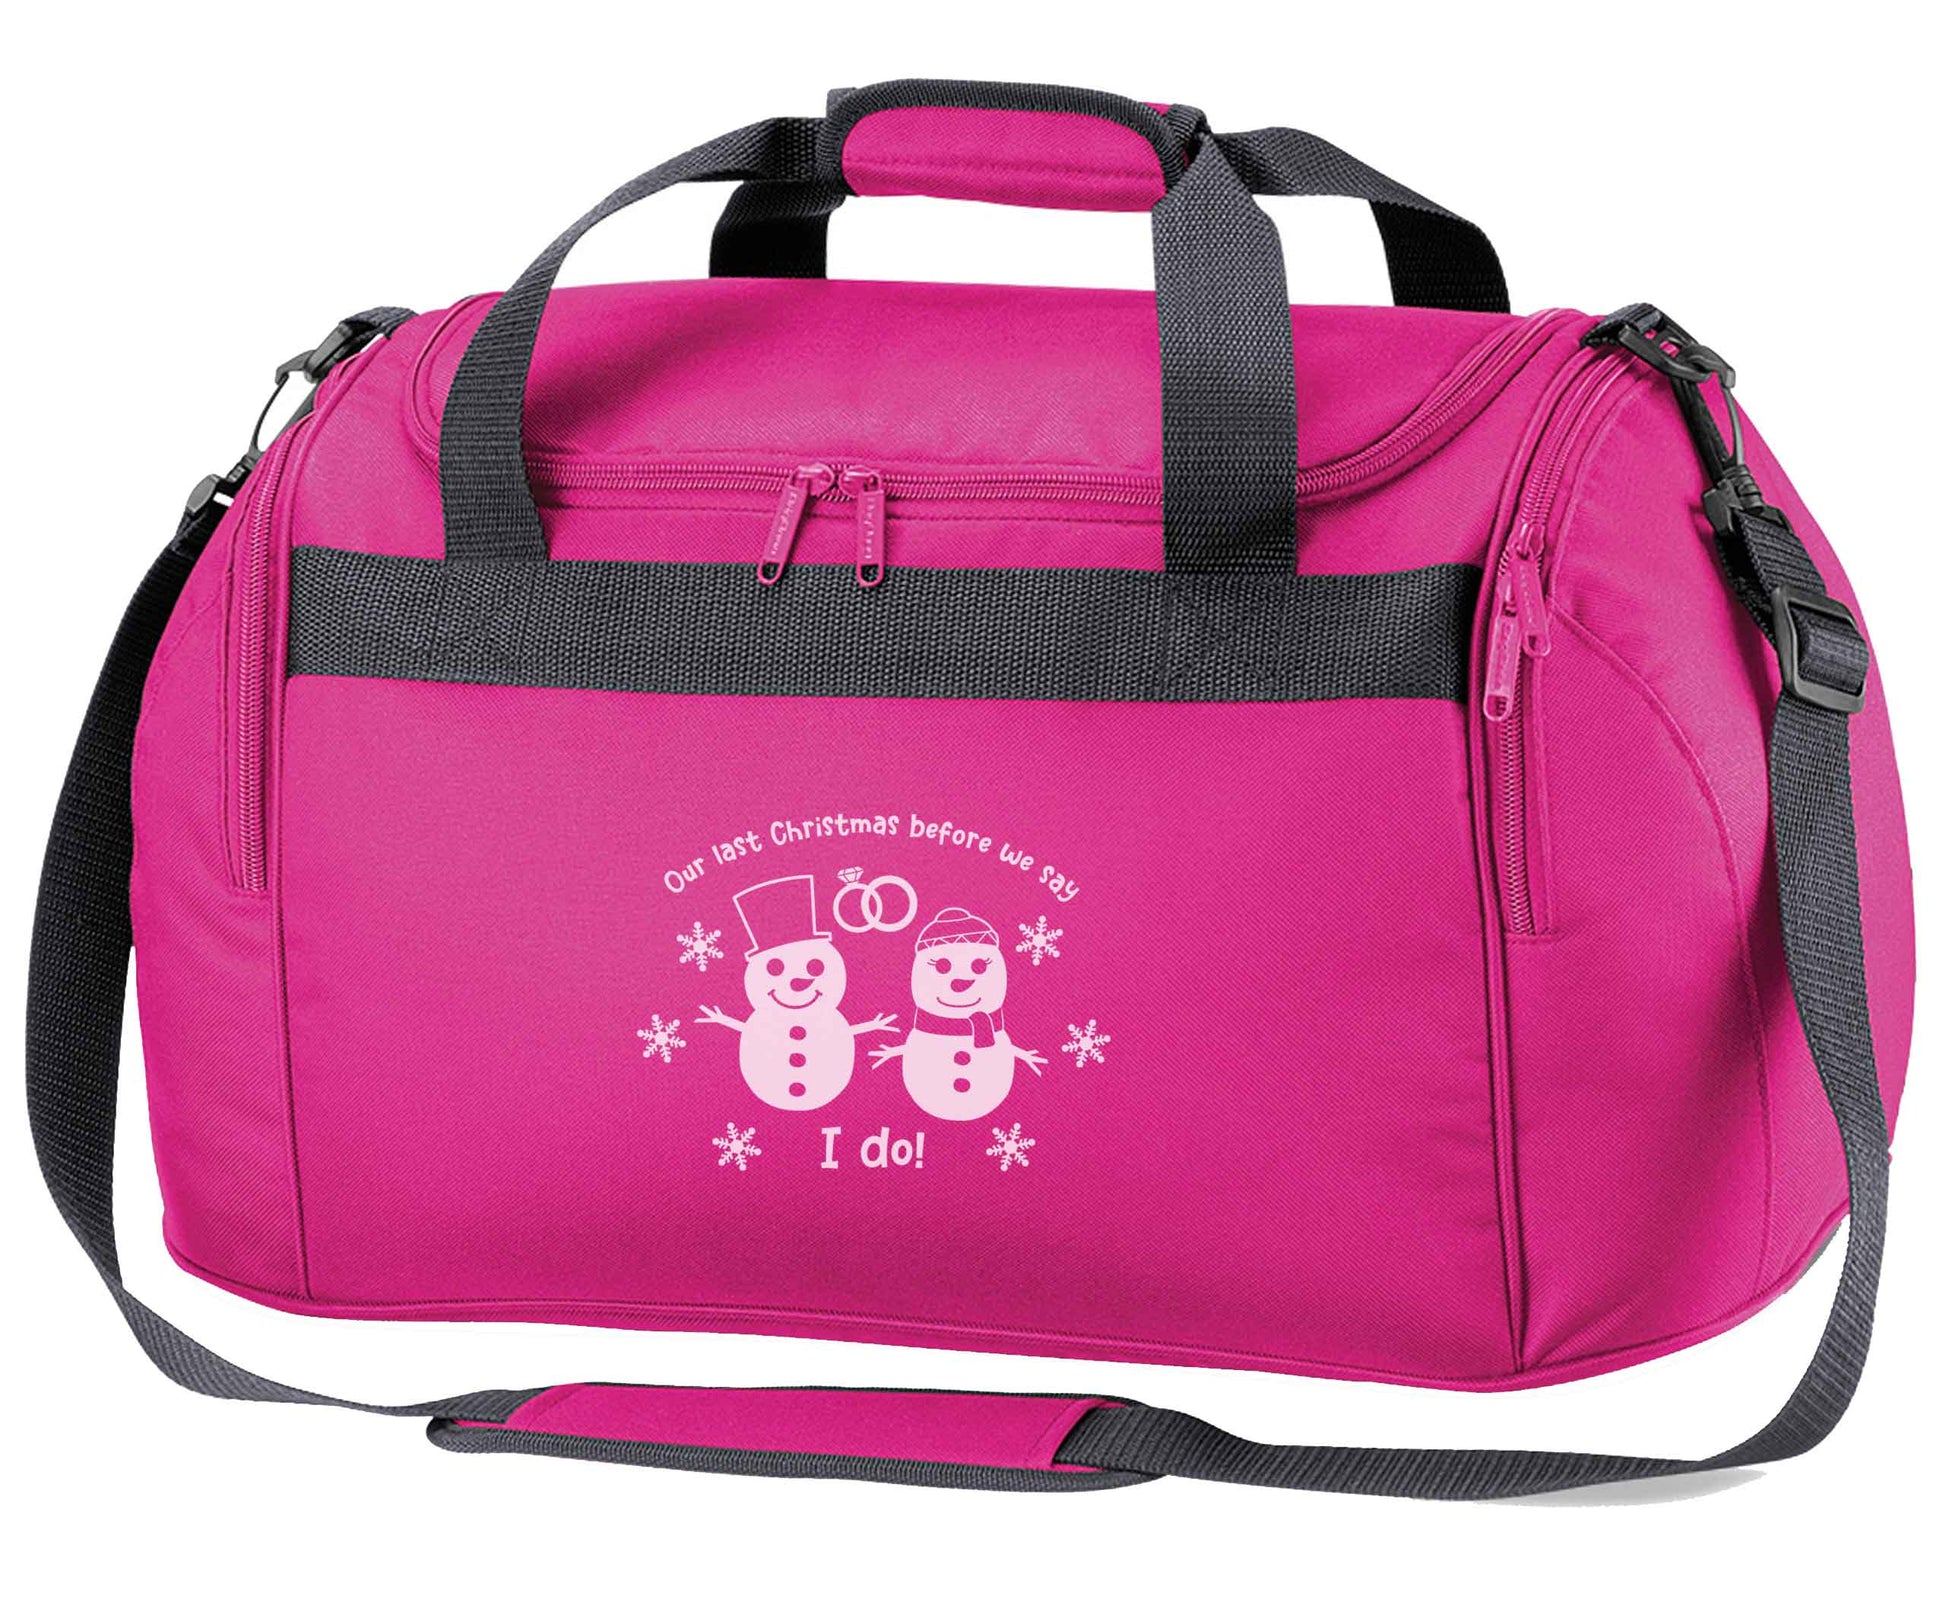 Last Christmas before we say I do pink holdall / duffel bag